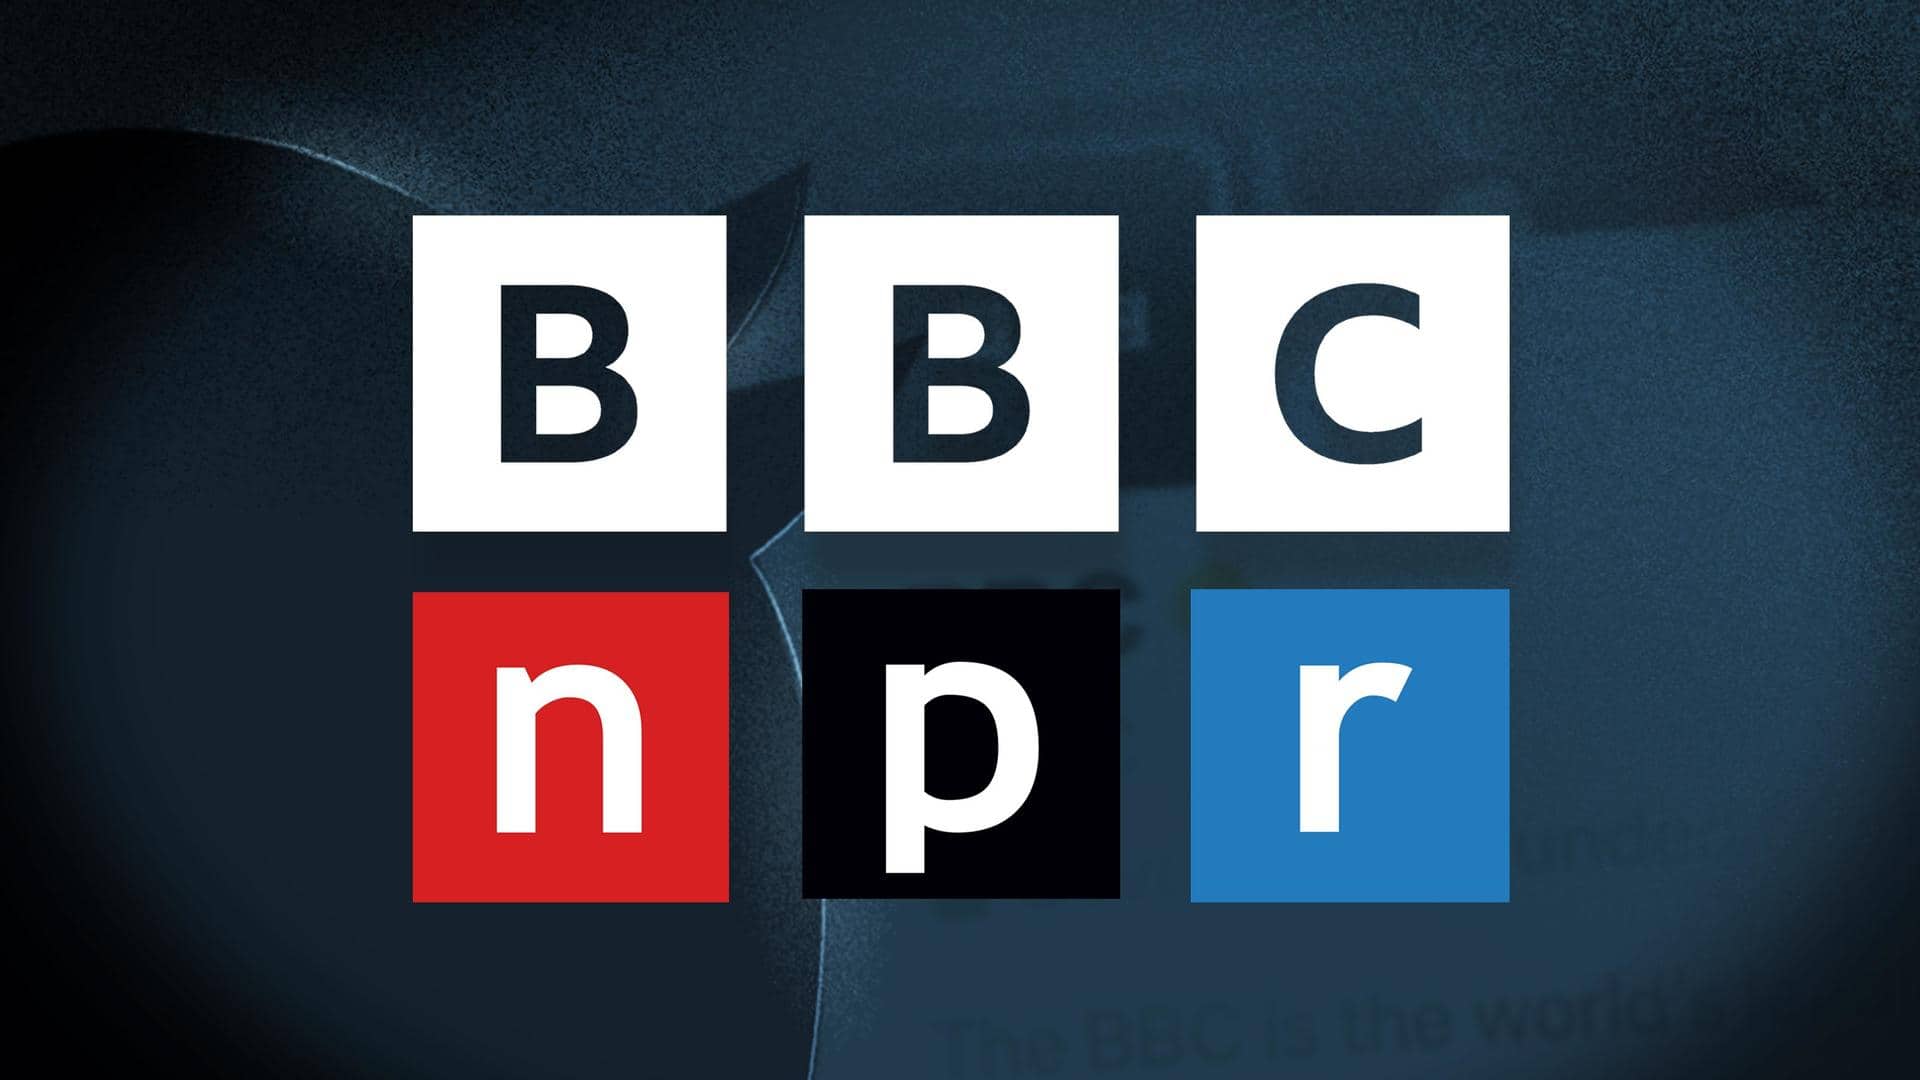 Twitter labels BBC, NPR 'government-funded media'; broadcasters react sharply